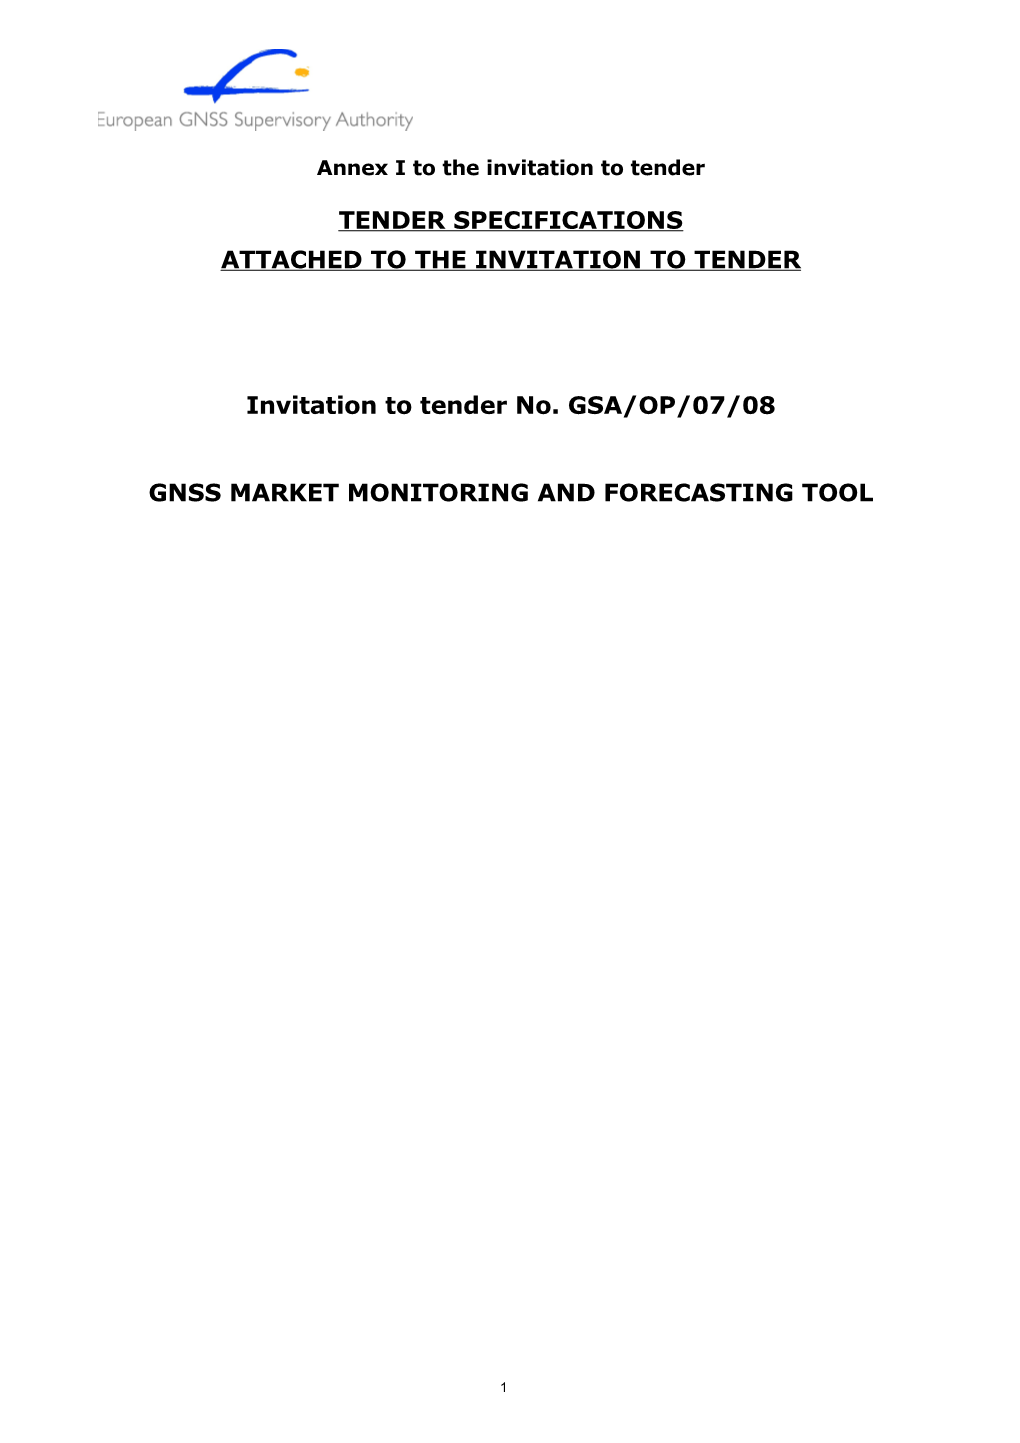 Annex I to the Invitation to Tender